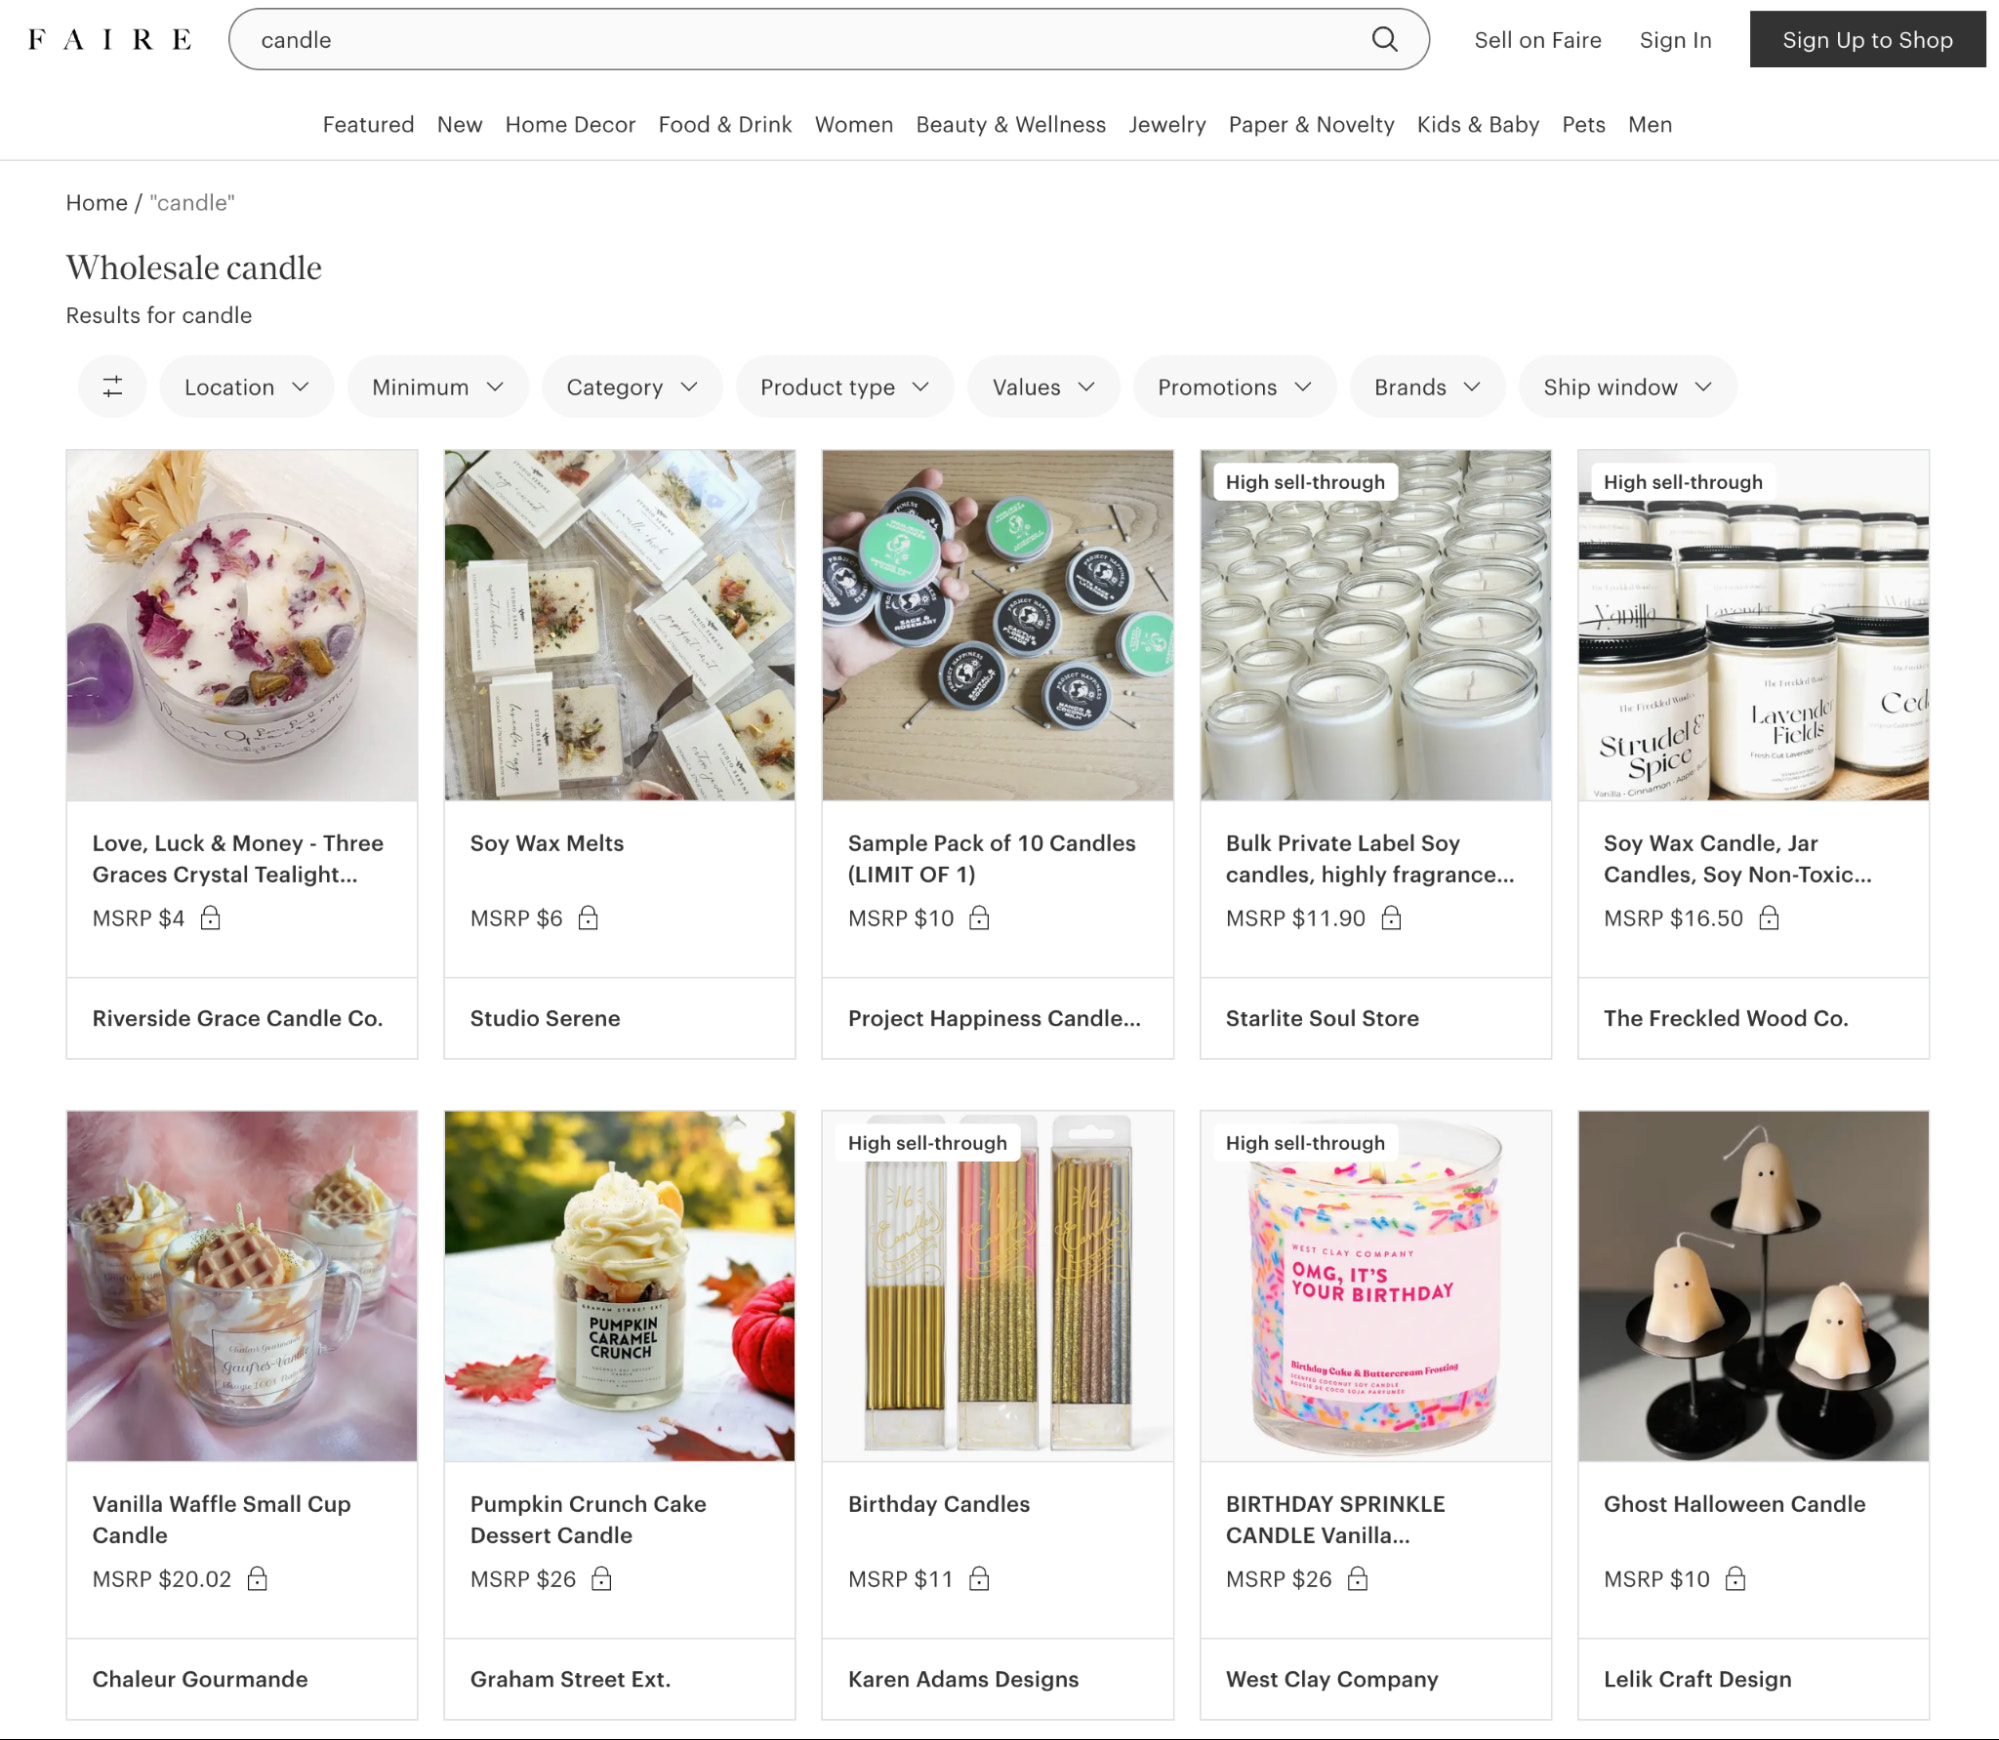 Image of results from searching “candle” on Faire wholesale marketplace